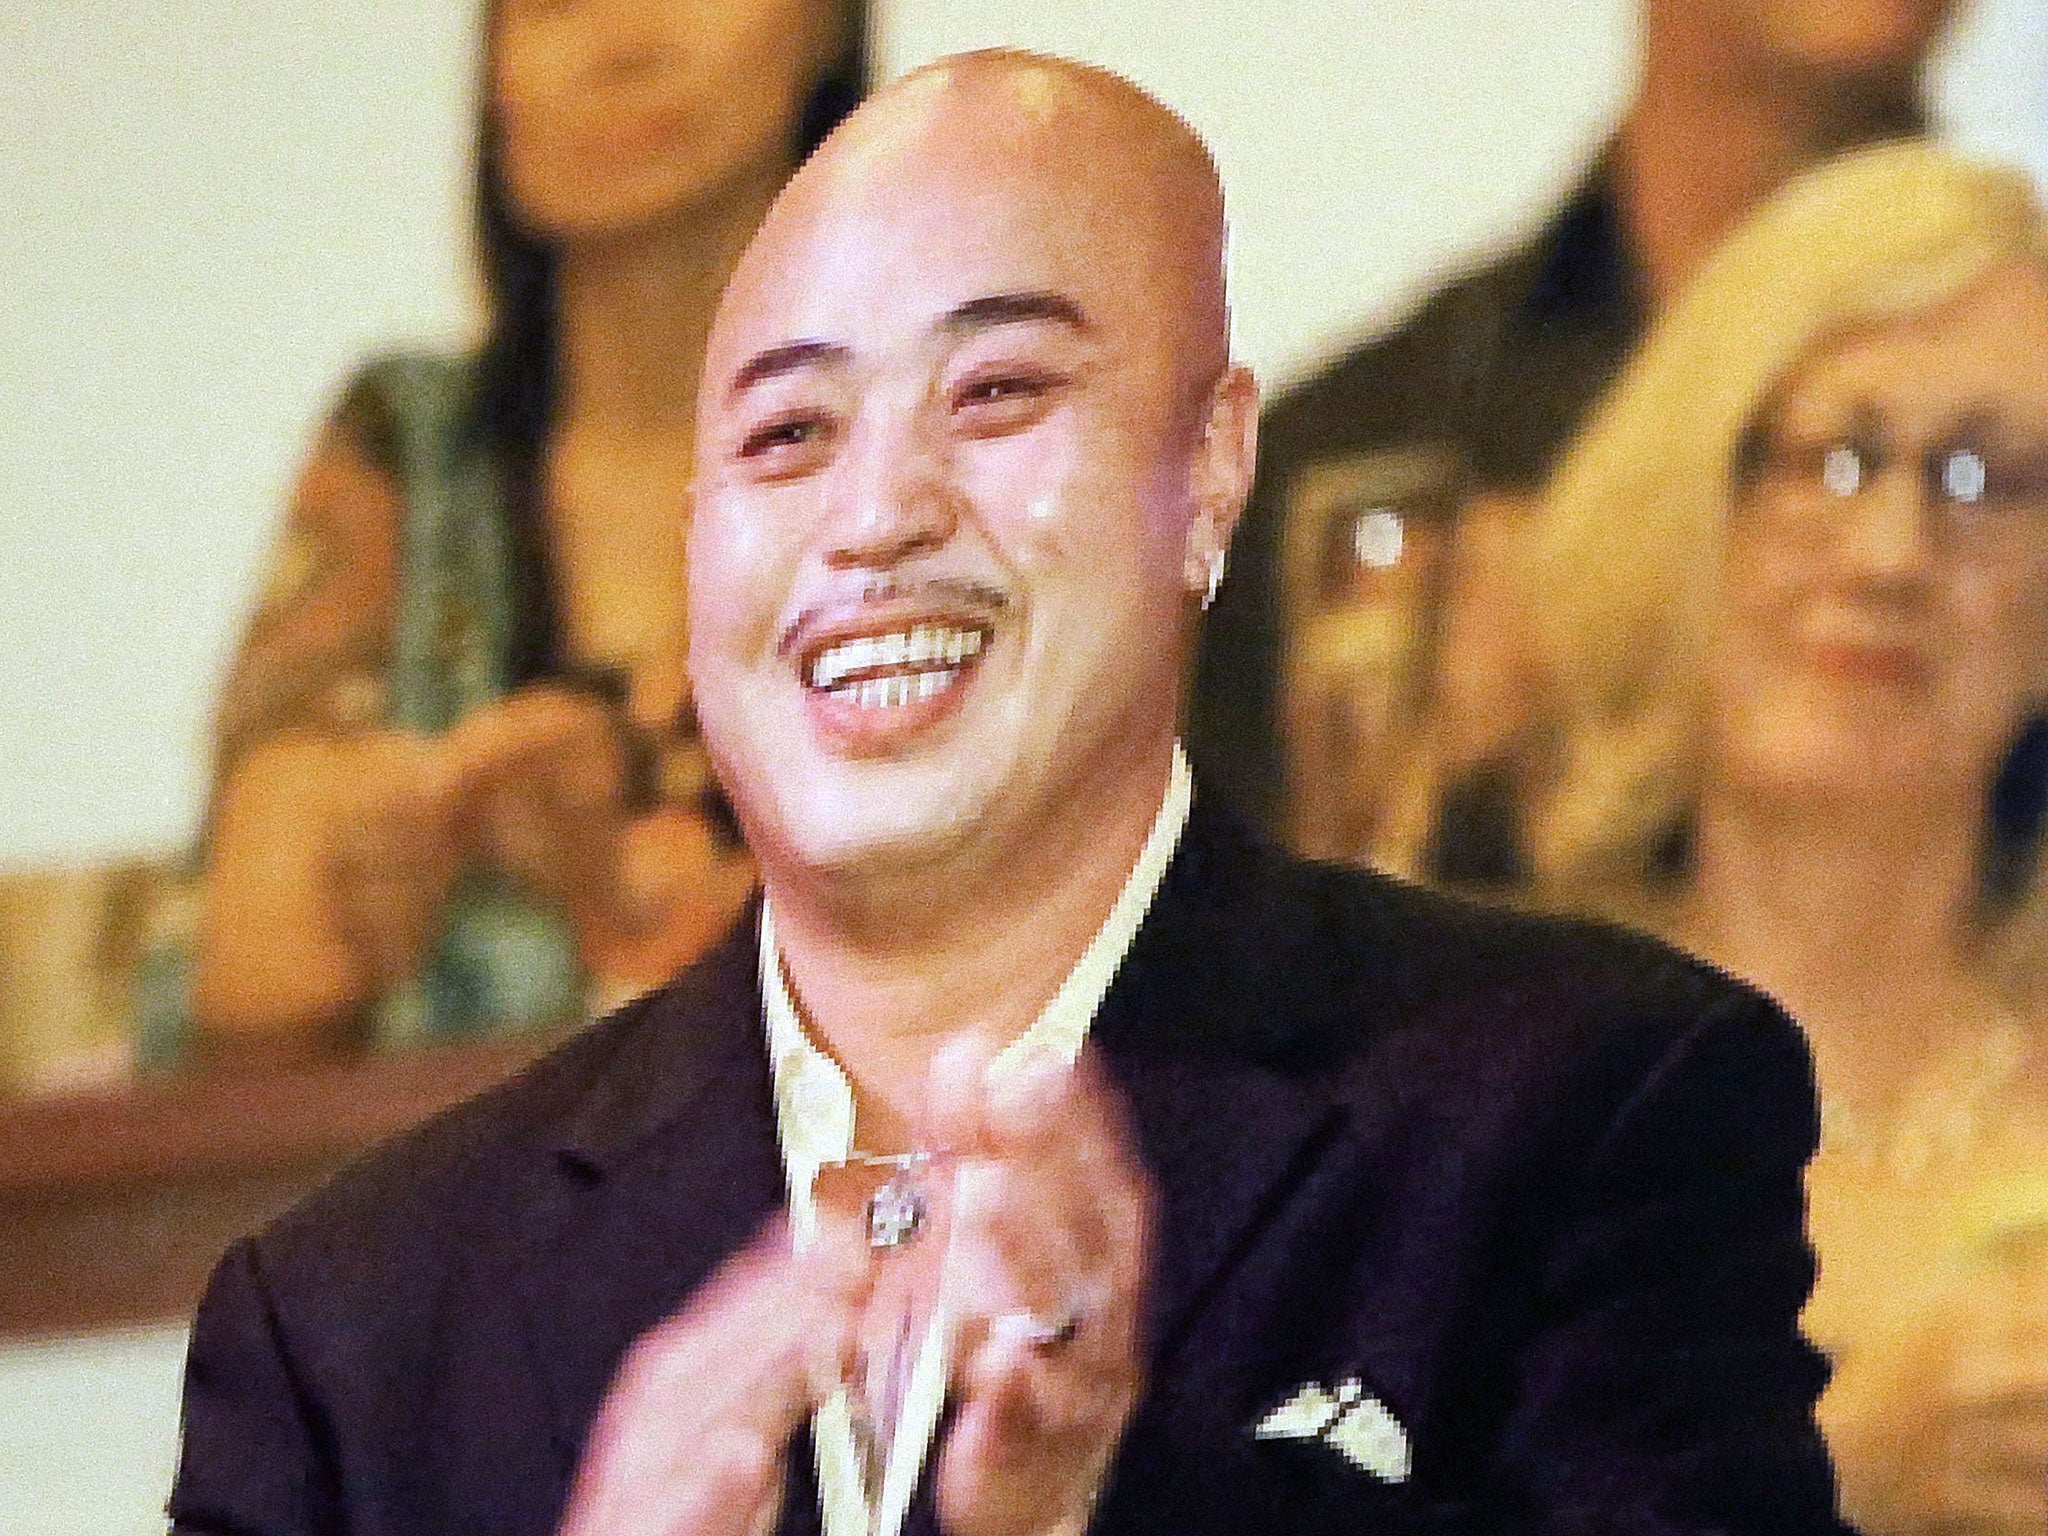 Raymond Chow, known as Shrimp Boy, faces multiple charges including murder